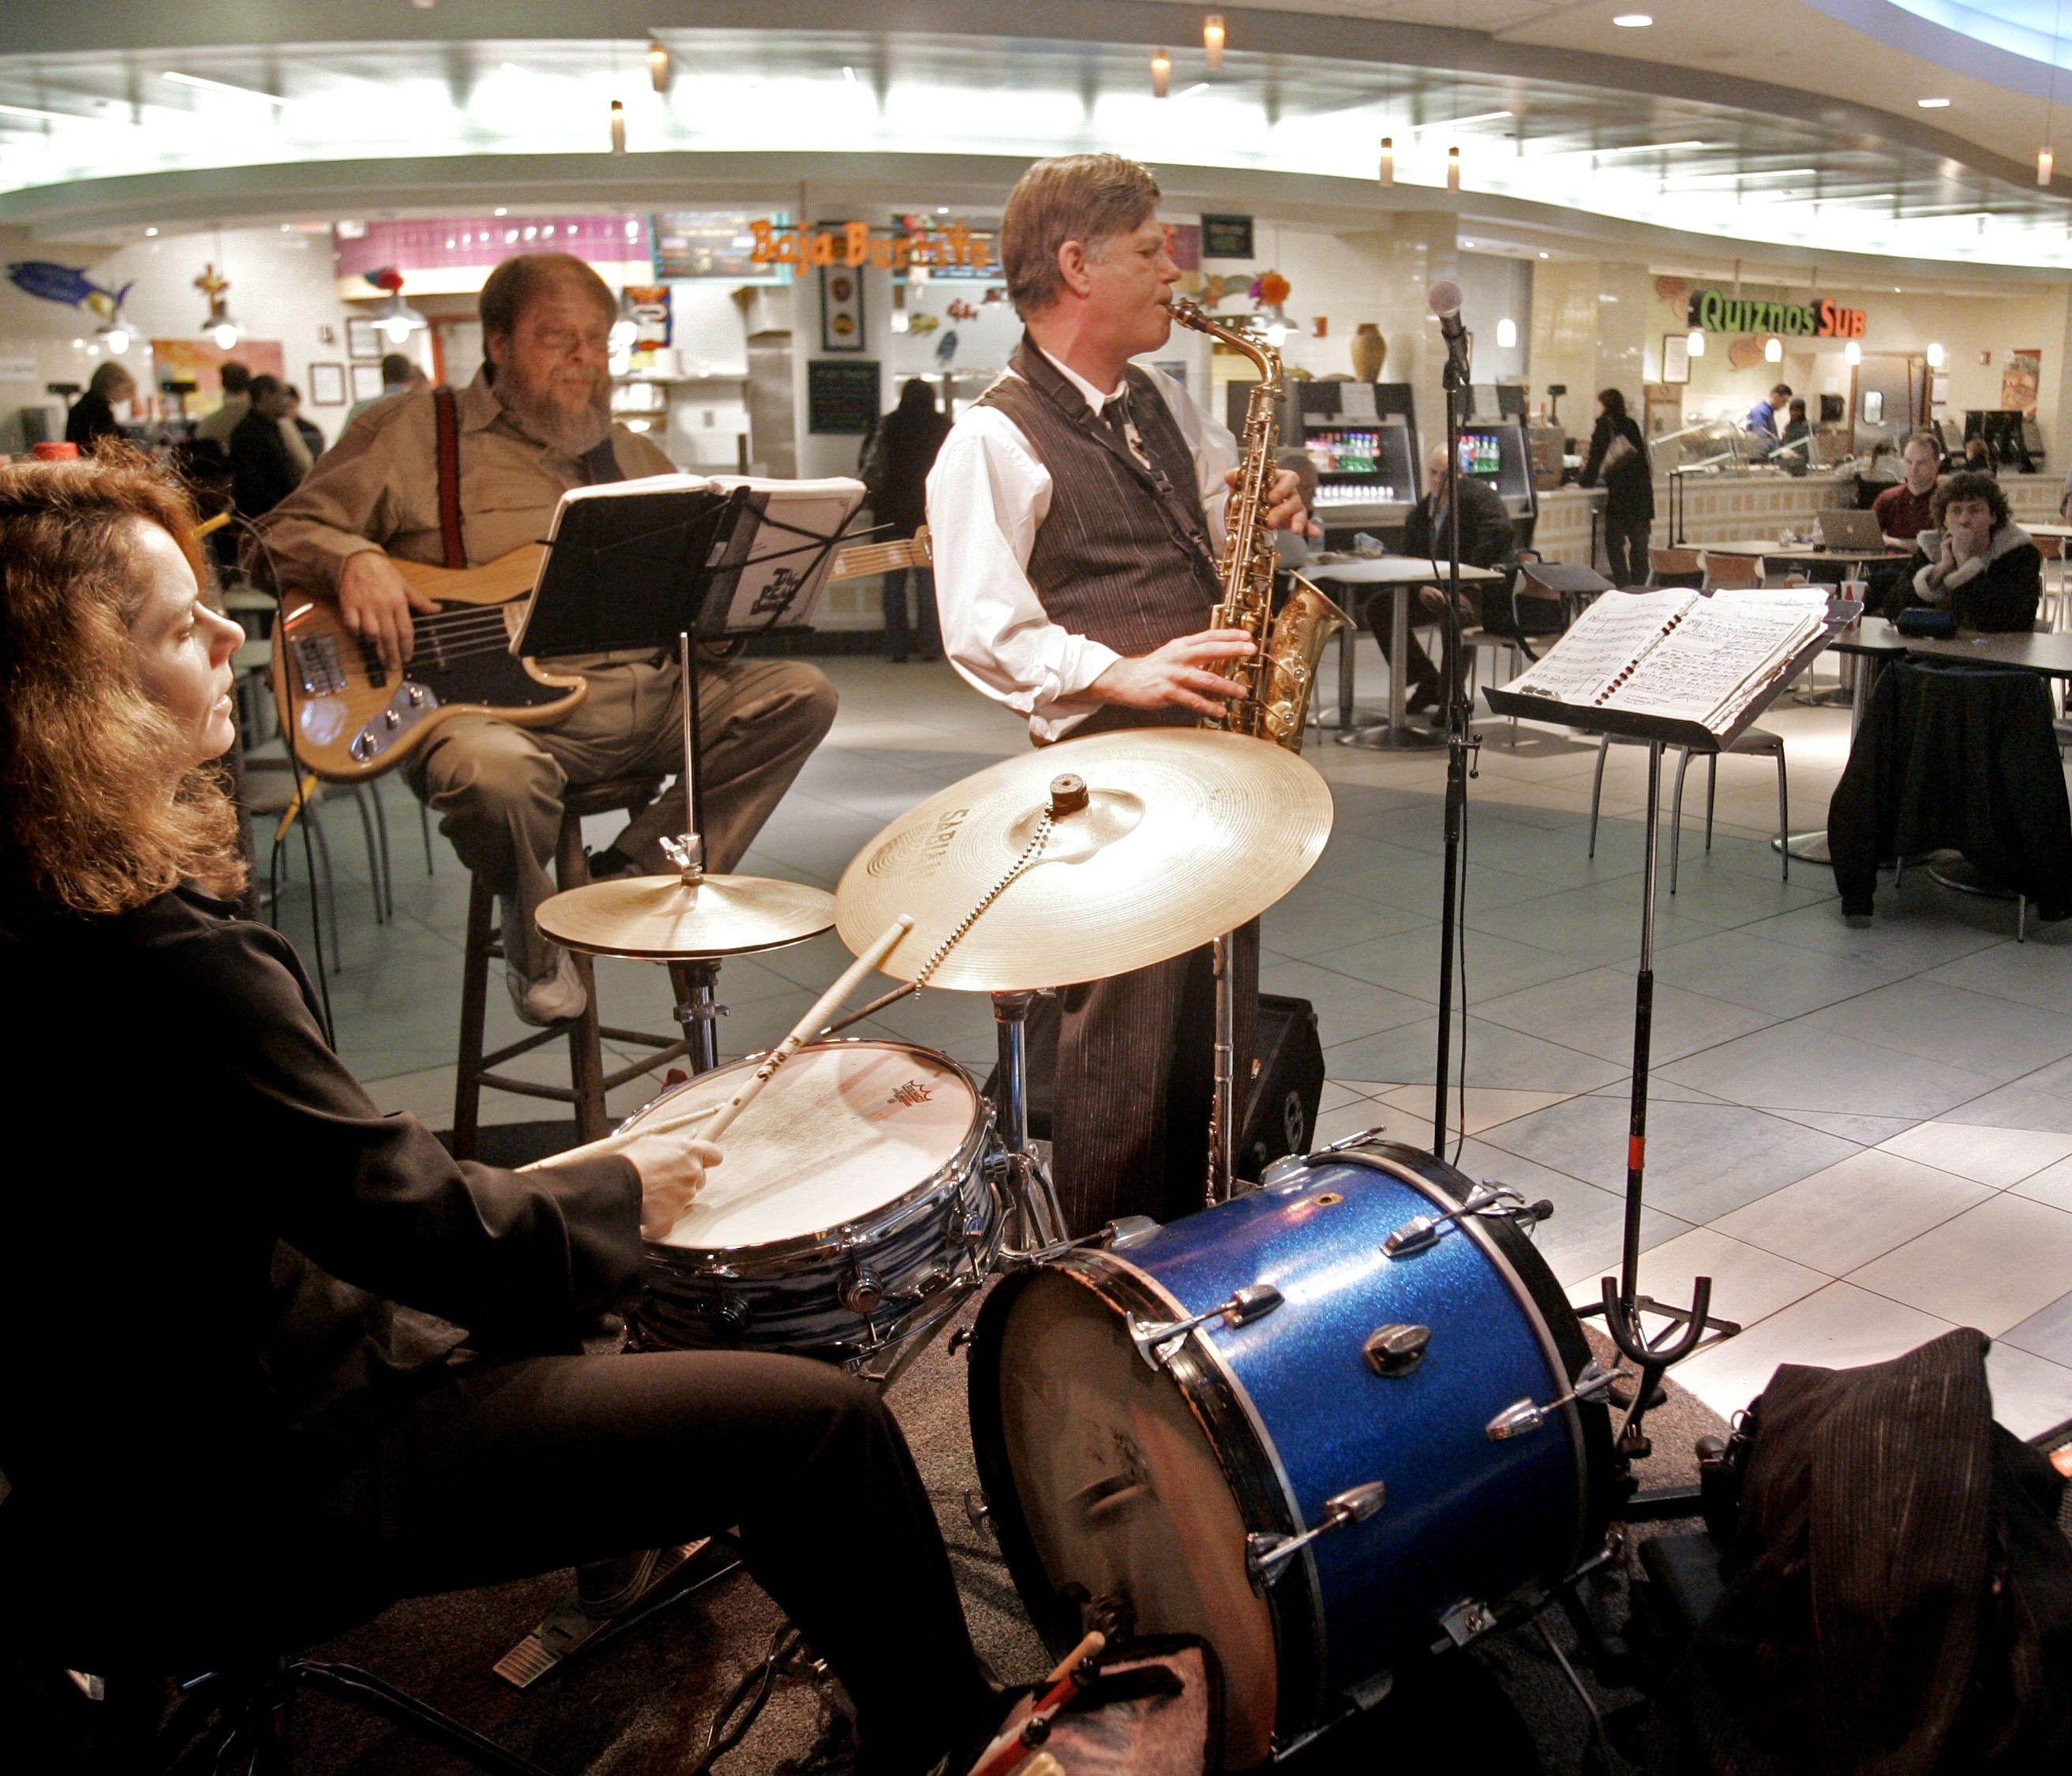 Drummer Kelly Bamberger, bass player Gary Branchaud, and saxophonist John Heinrich perform in a food court at the Nashville International Airport.